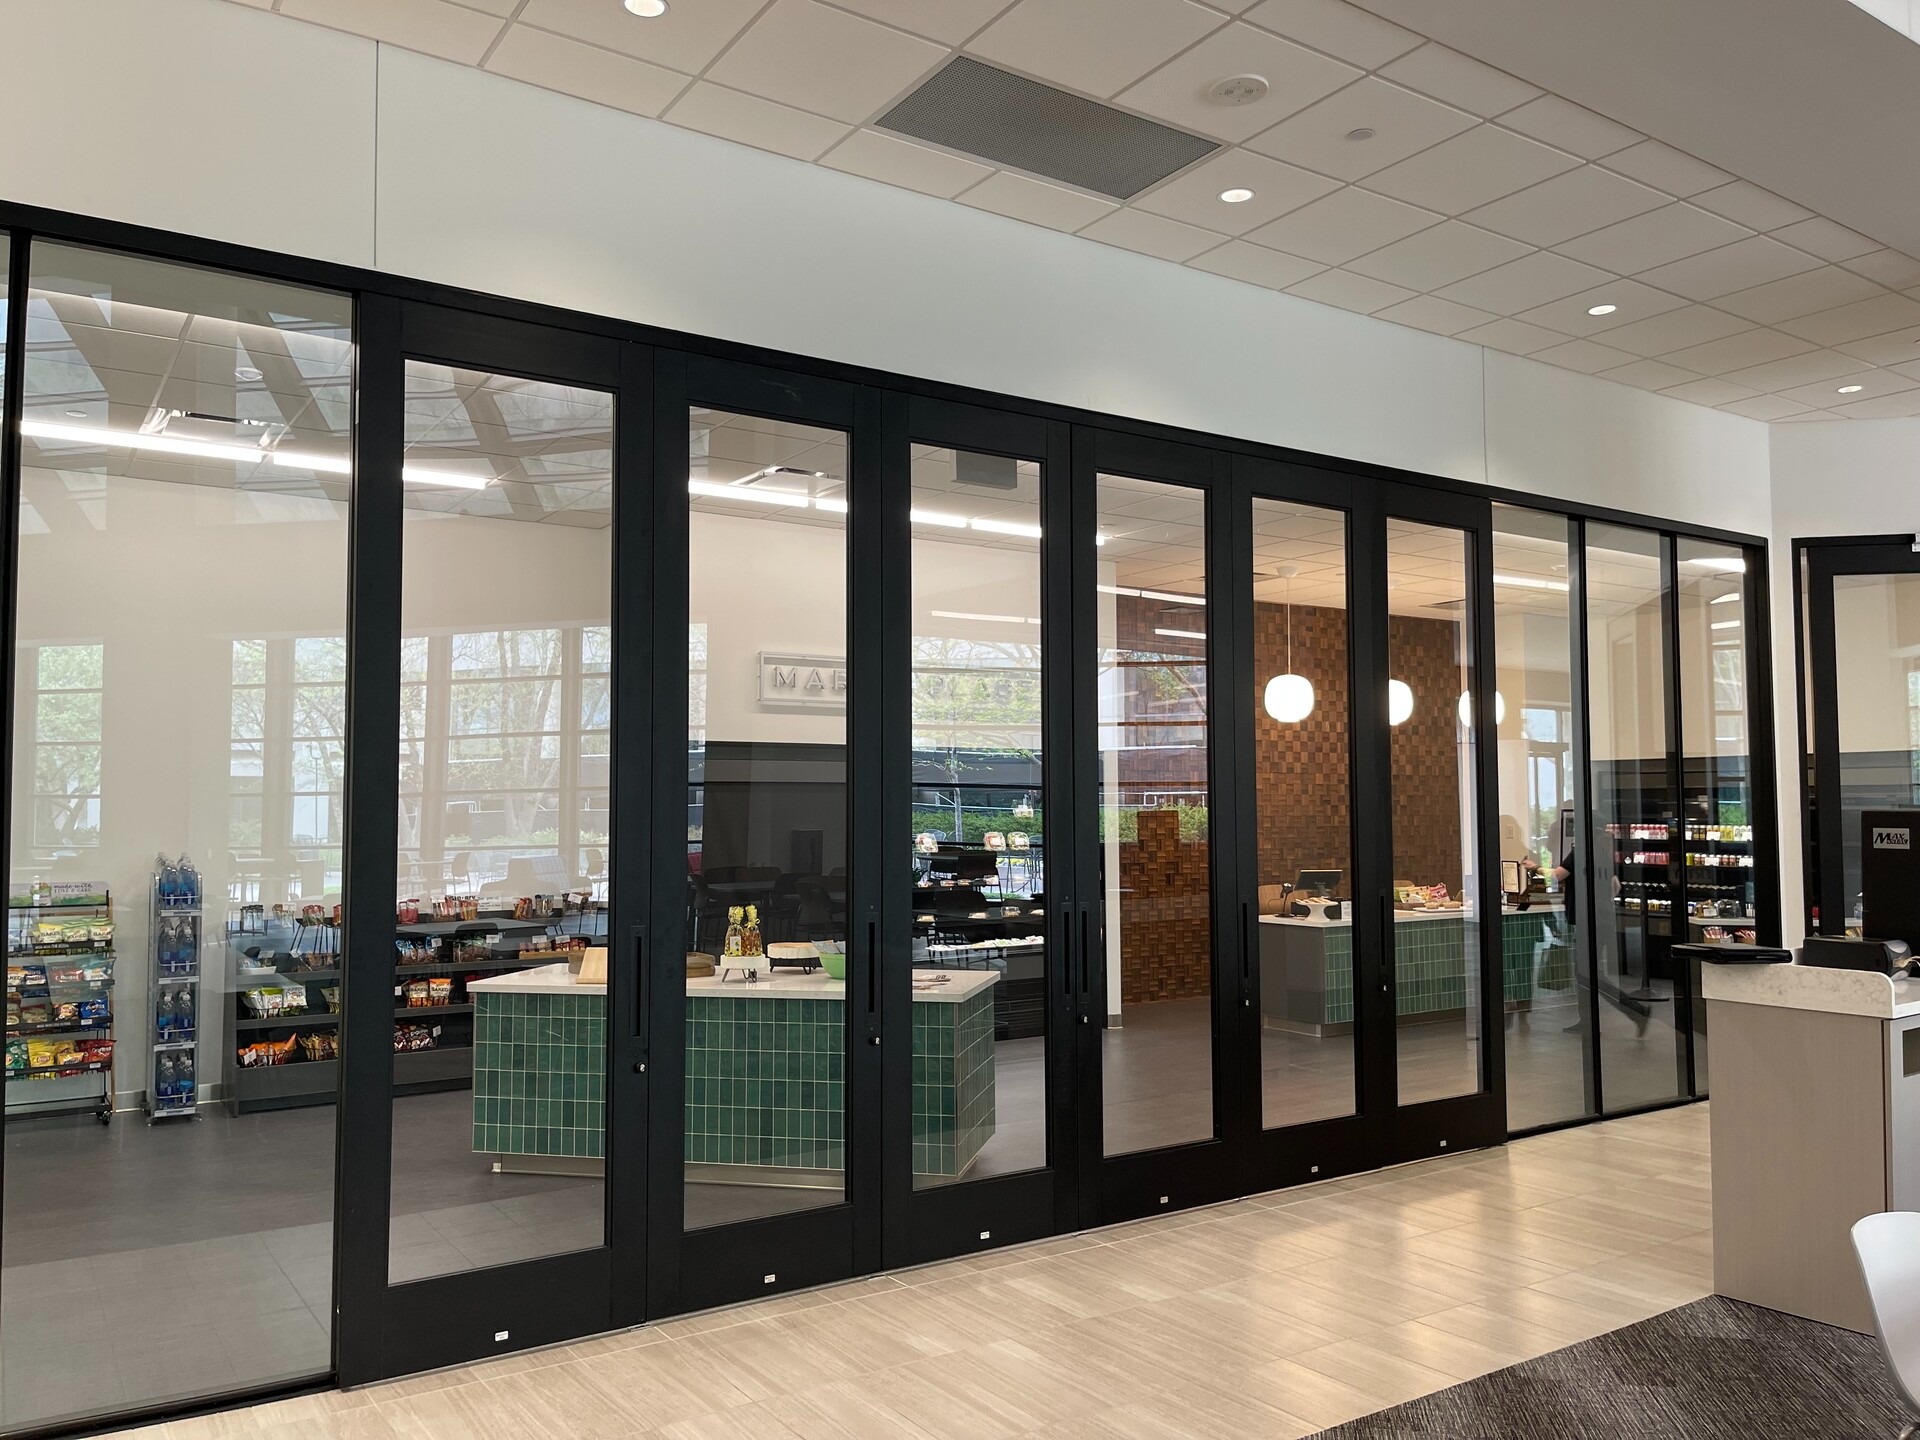 Project: OneAmerica Tower Cafe Sliding Door System